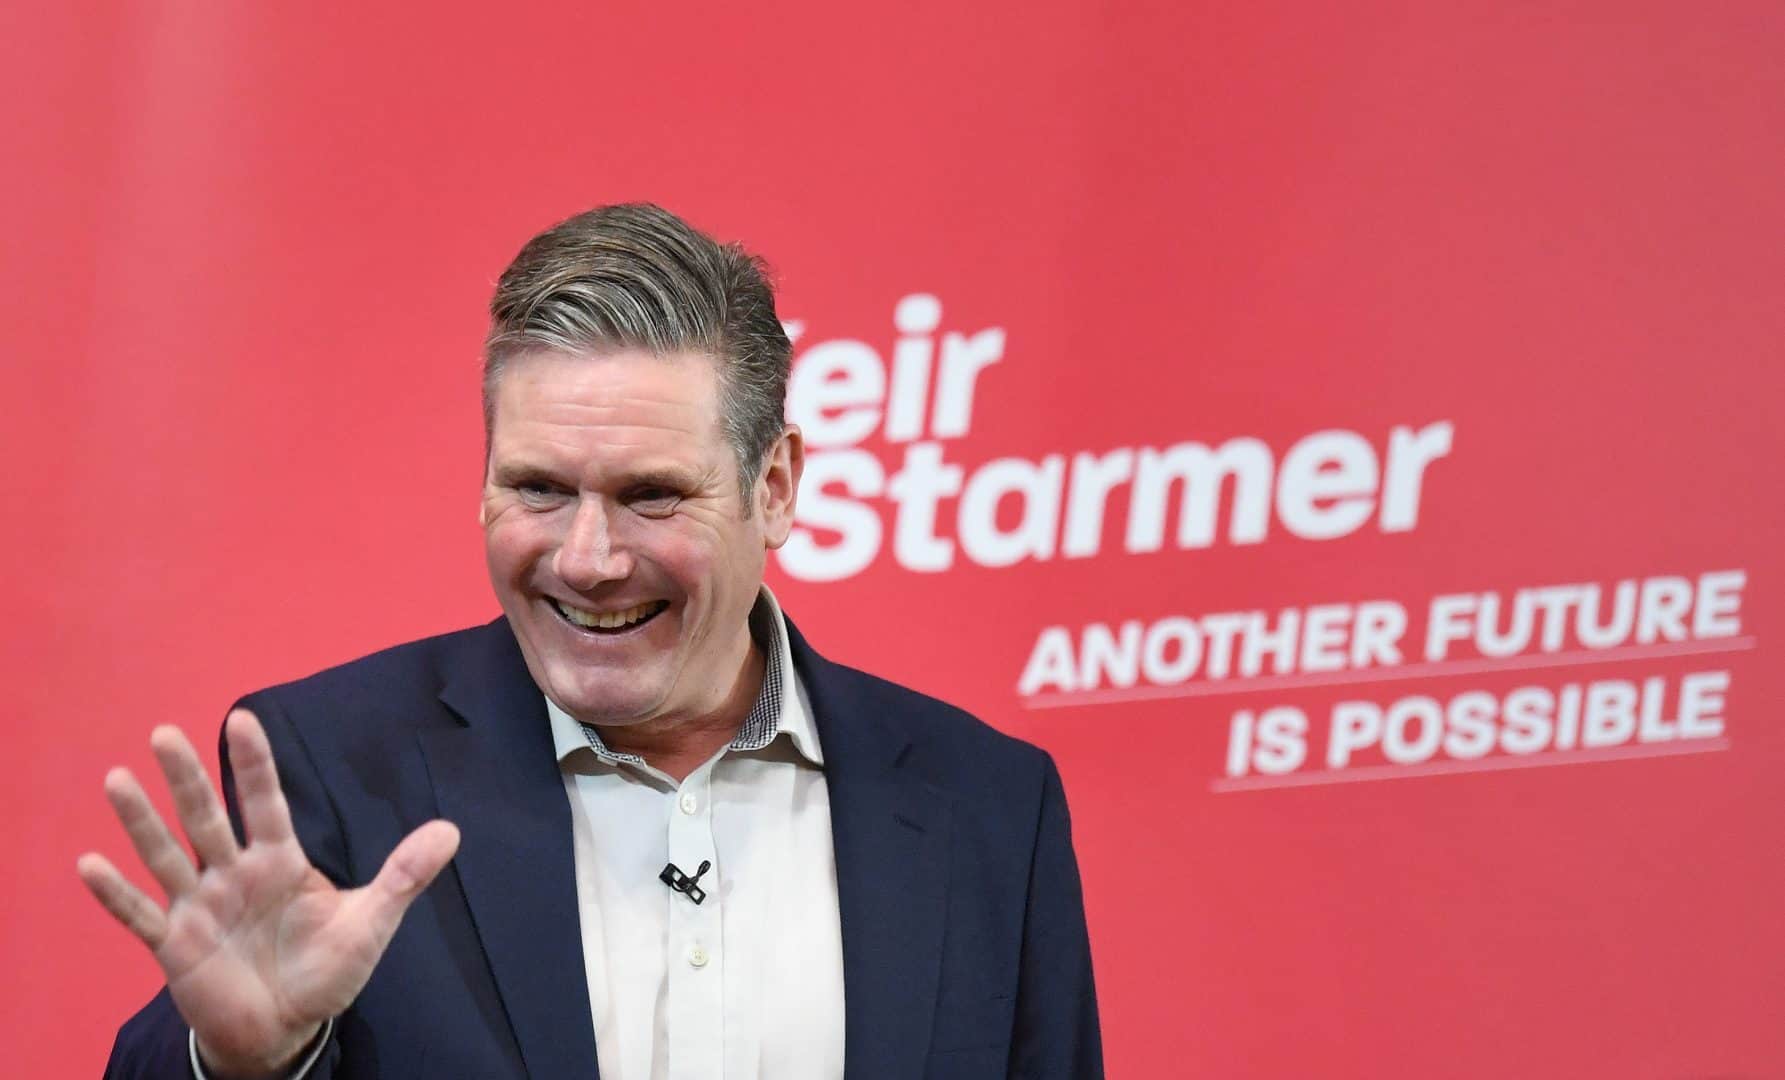 New Labour leader Sir Keir Starmer to appoint shadow cabinet